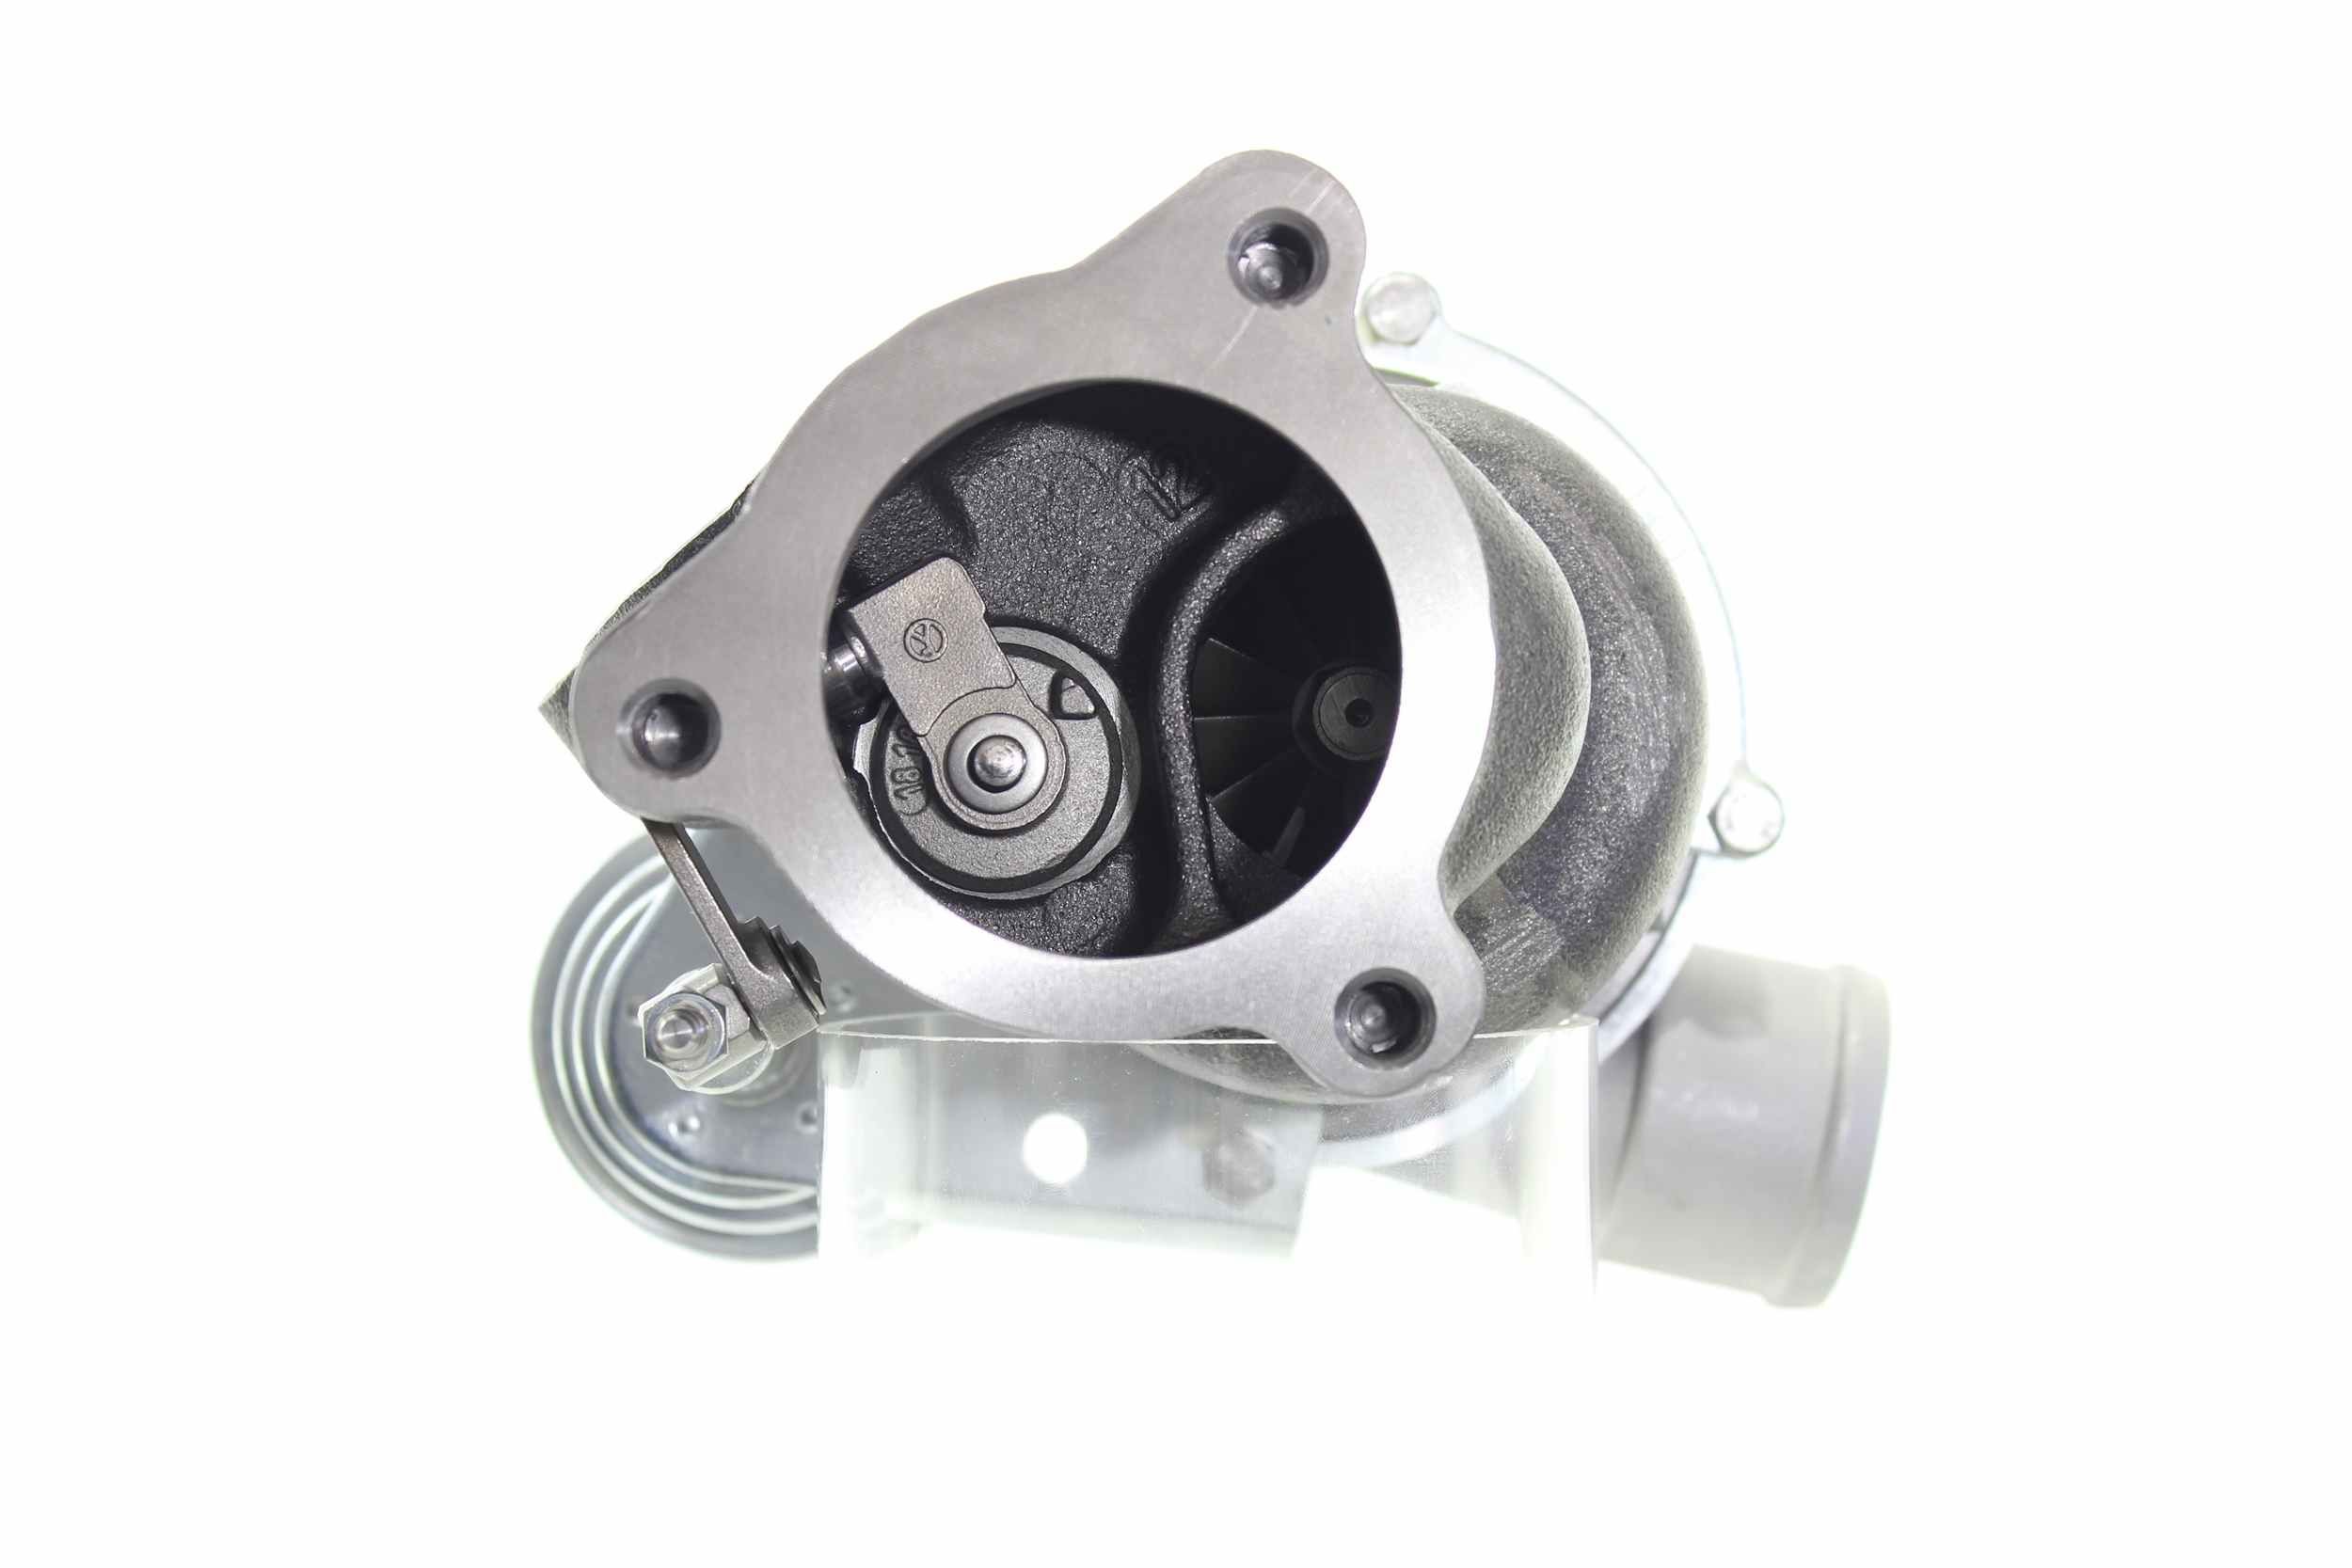 ALANKO 10900092 Turbo Exhaust Turbocharger, Incl. Gasket Set, with attachment material